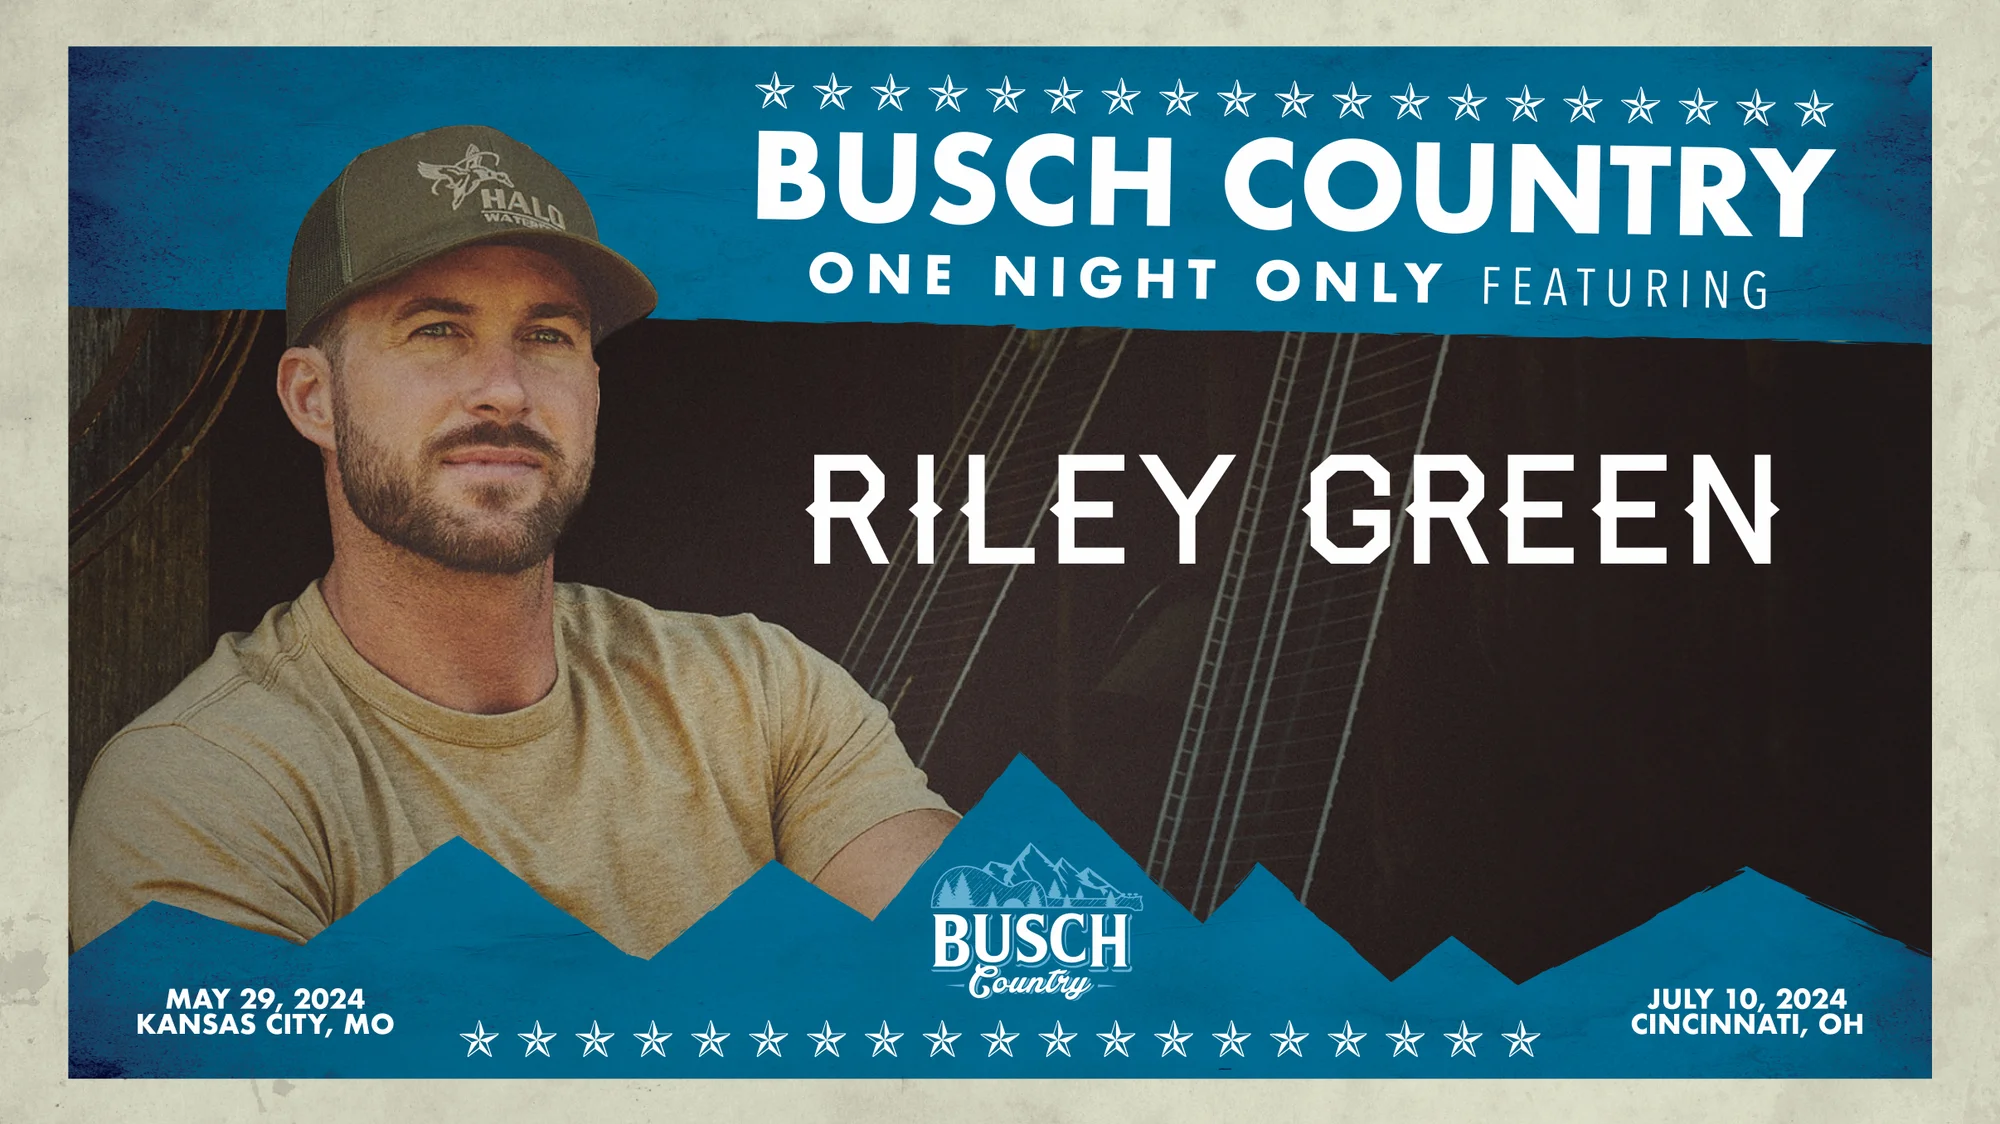 Busch Light Taps Multi-Platinum Singer Songwriter Riley Green For Exclusive ‘Busch Country: One Night Only’ Concert Series